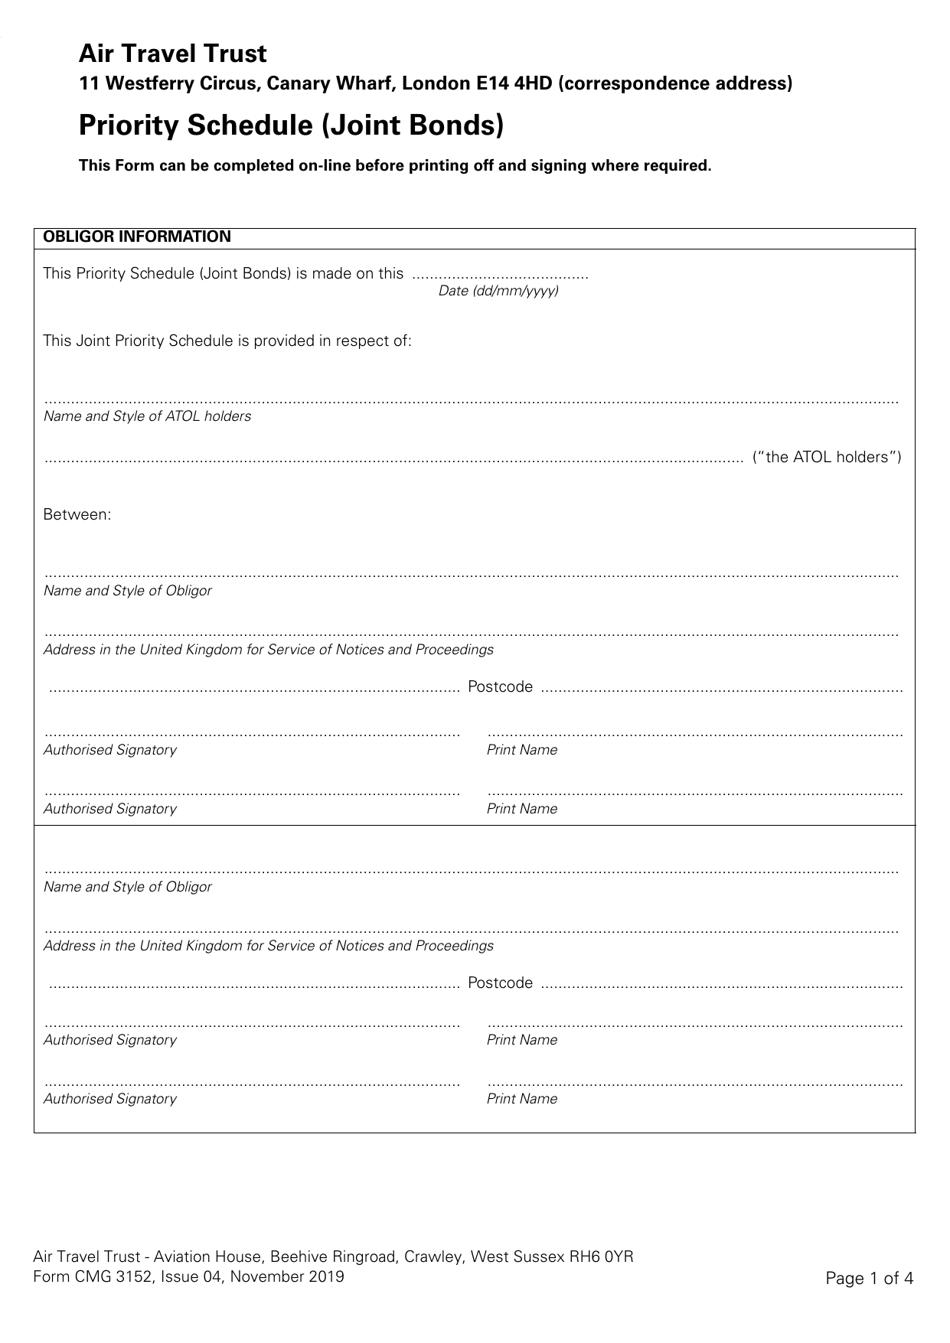 Form CMG3152 Priority Schedule (Joint Bonds) - United Kingdom, Page 1